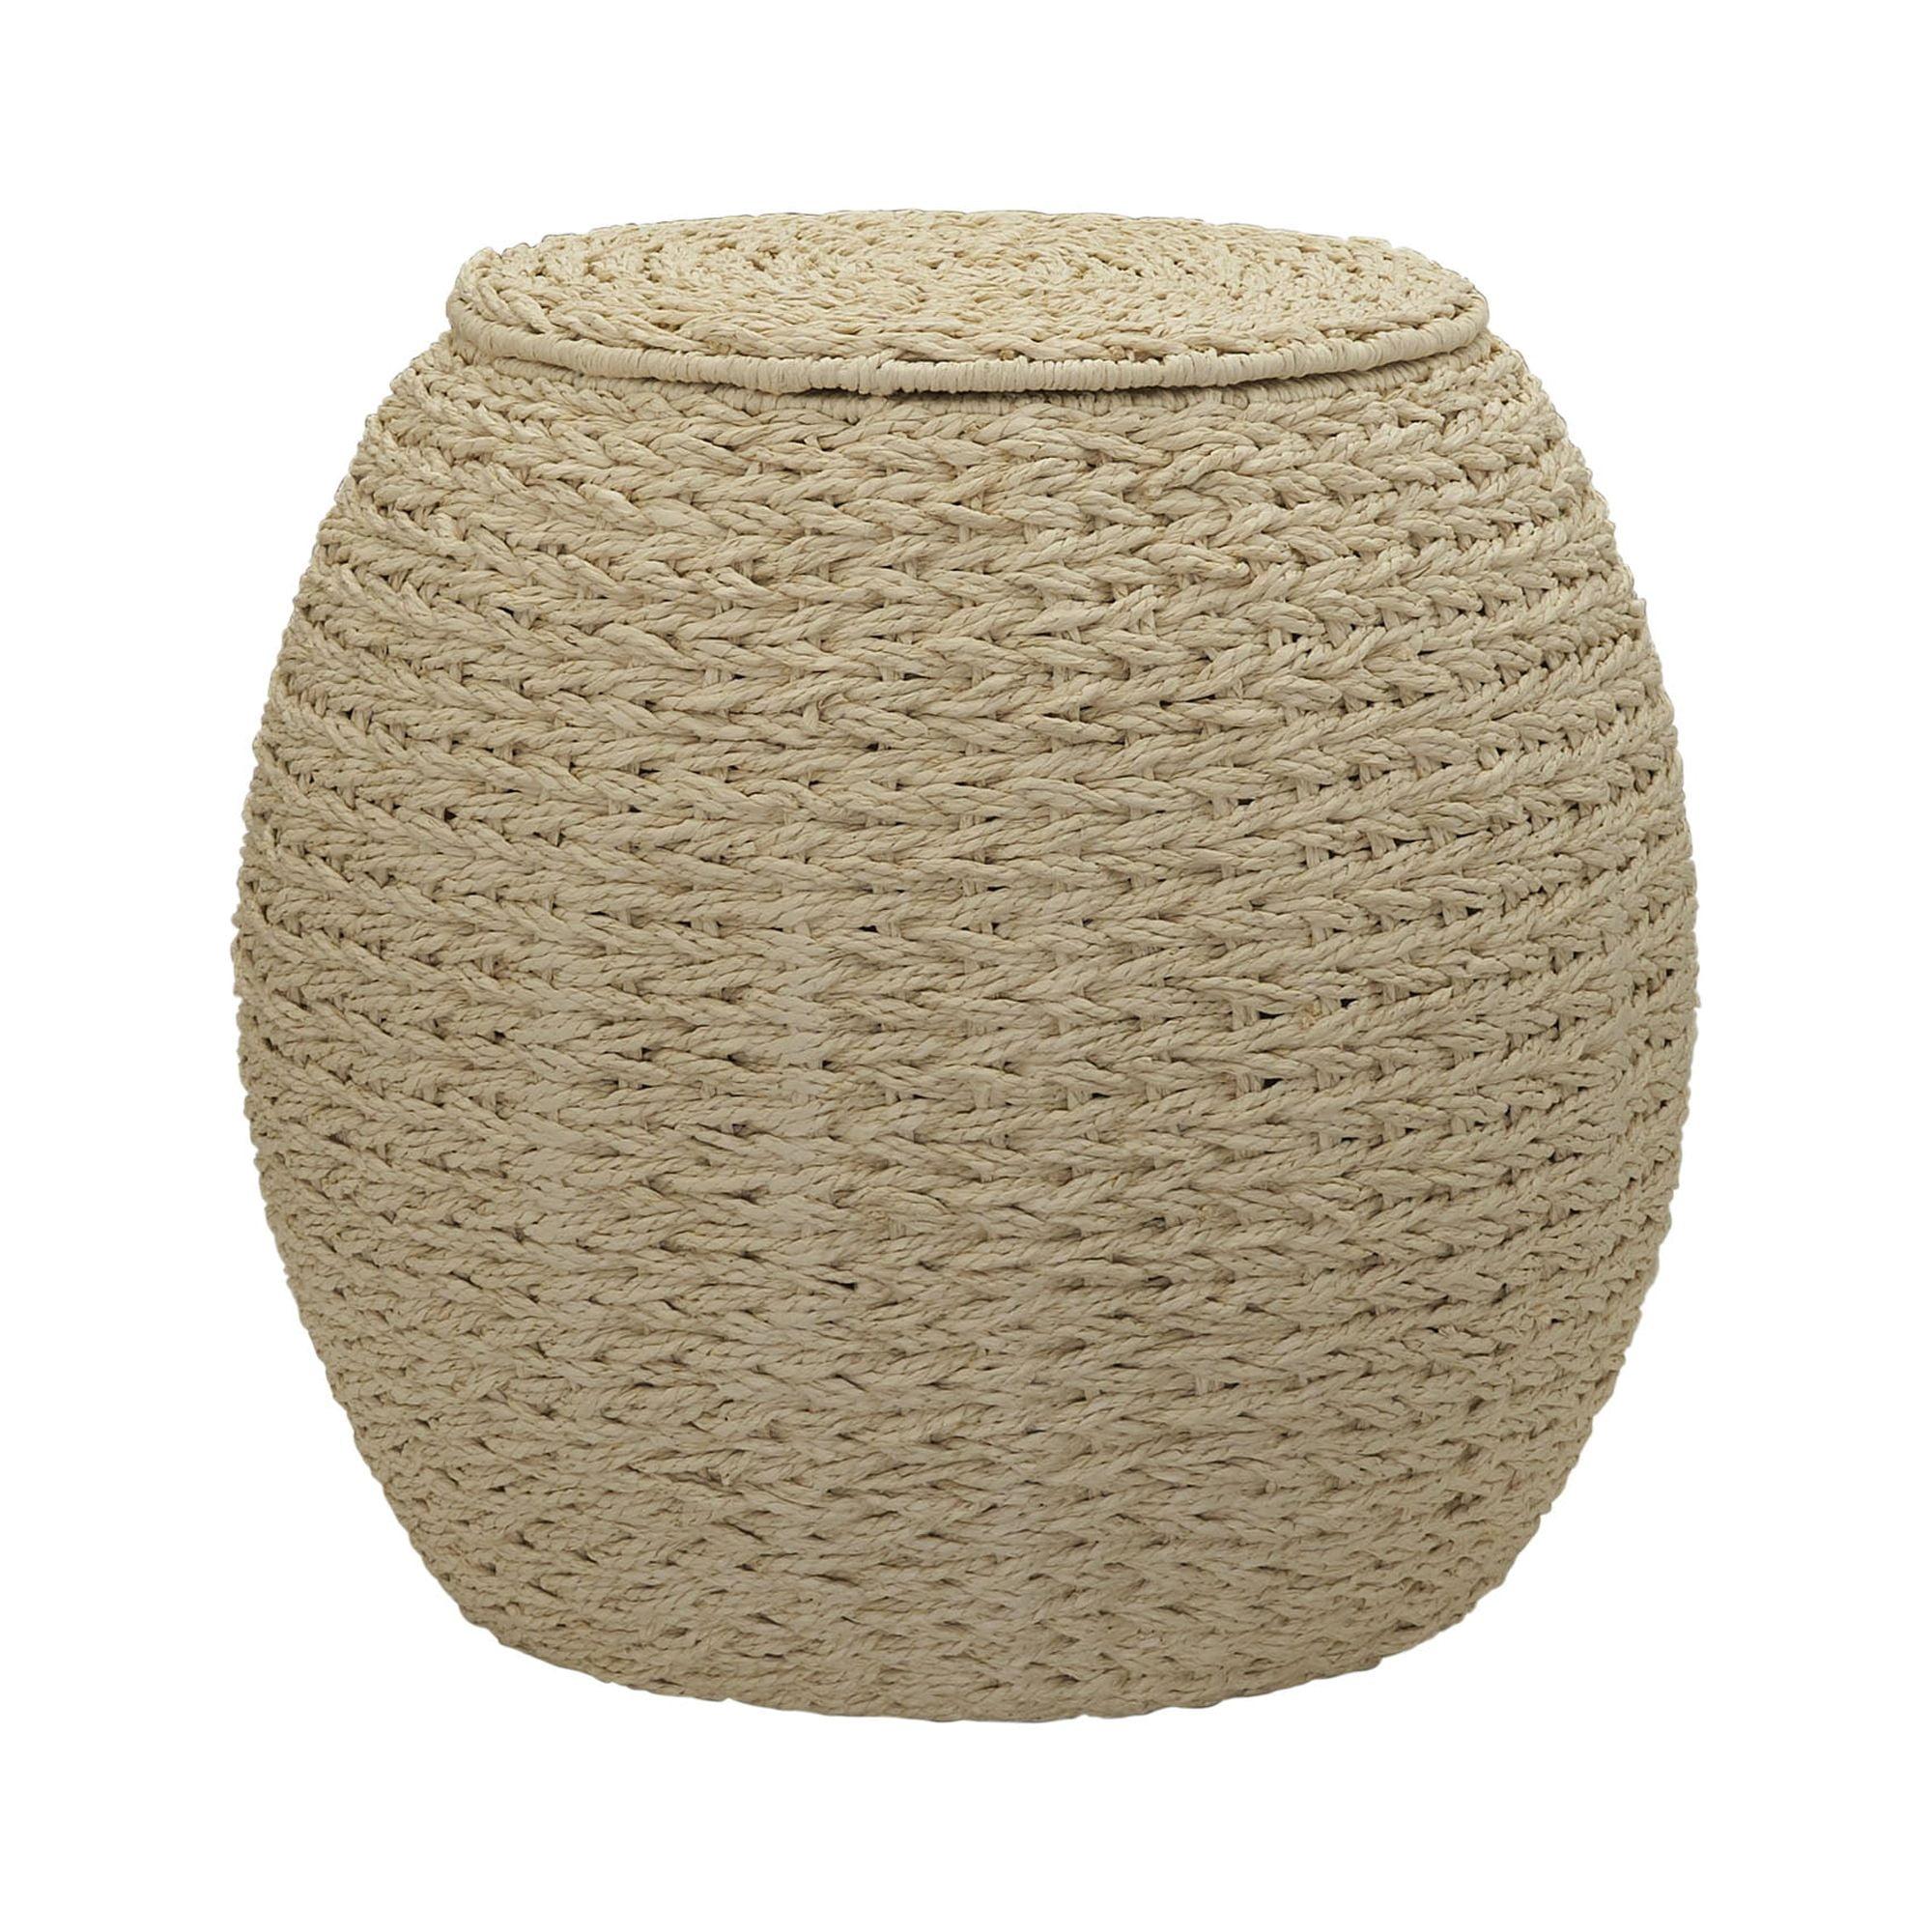 Rustic Cream Handwoven Paper Rope Barrel Side Table & Storage